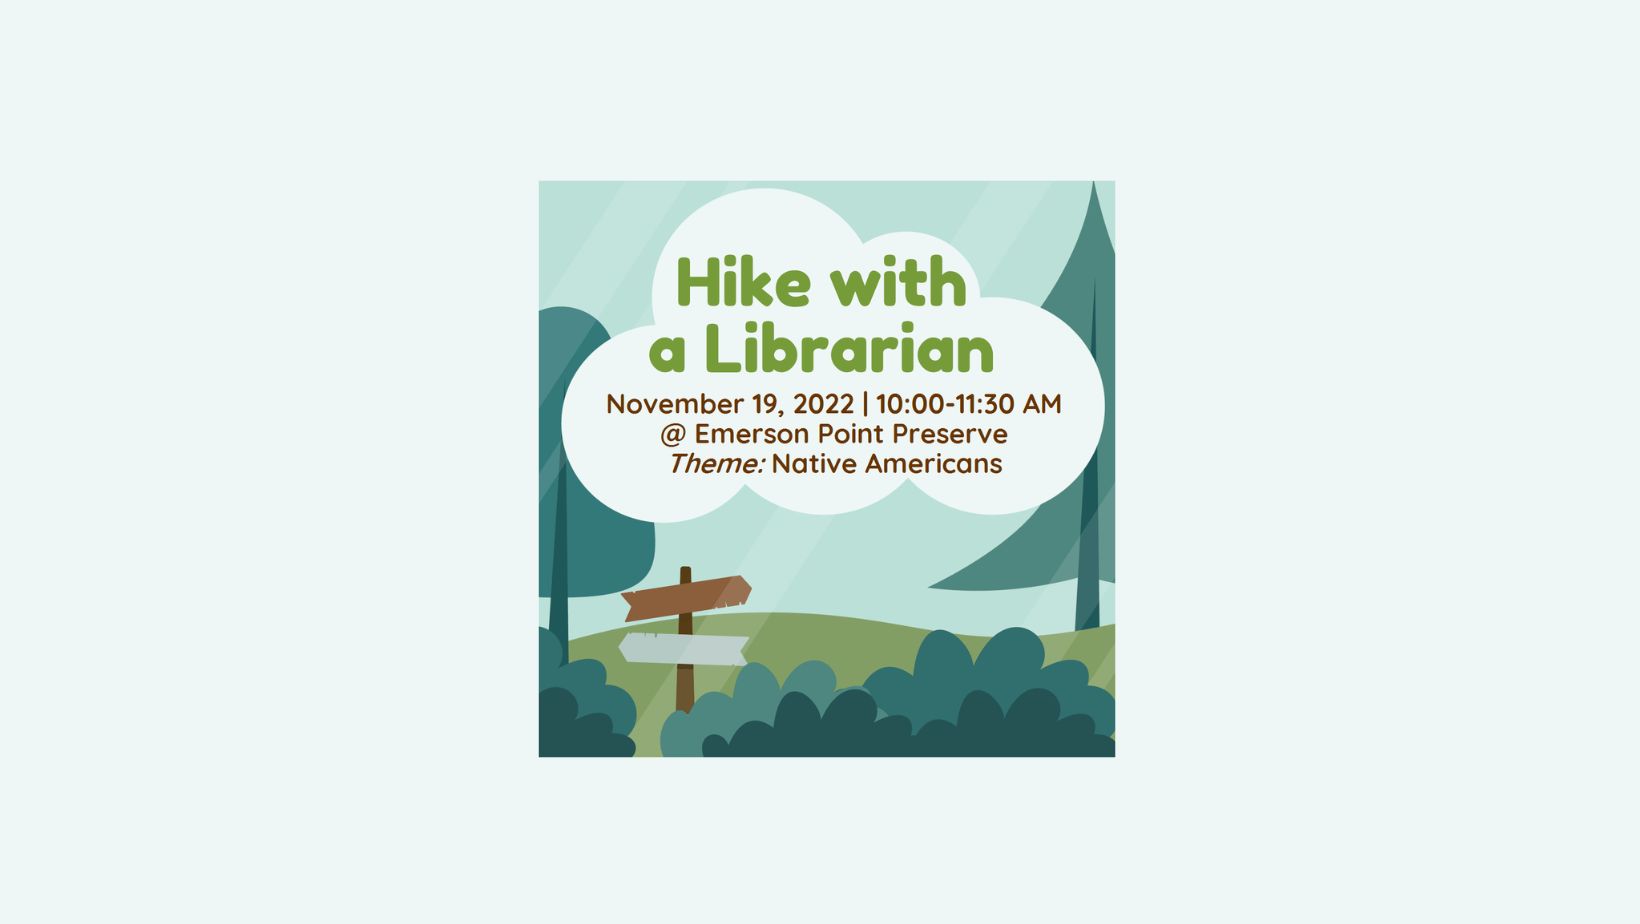 Hike with a Librarian